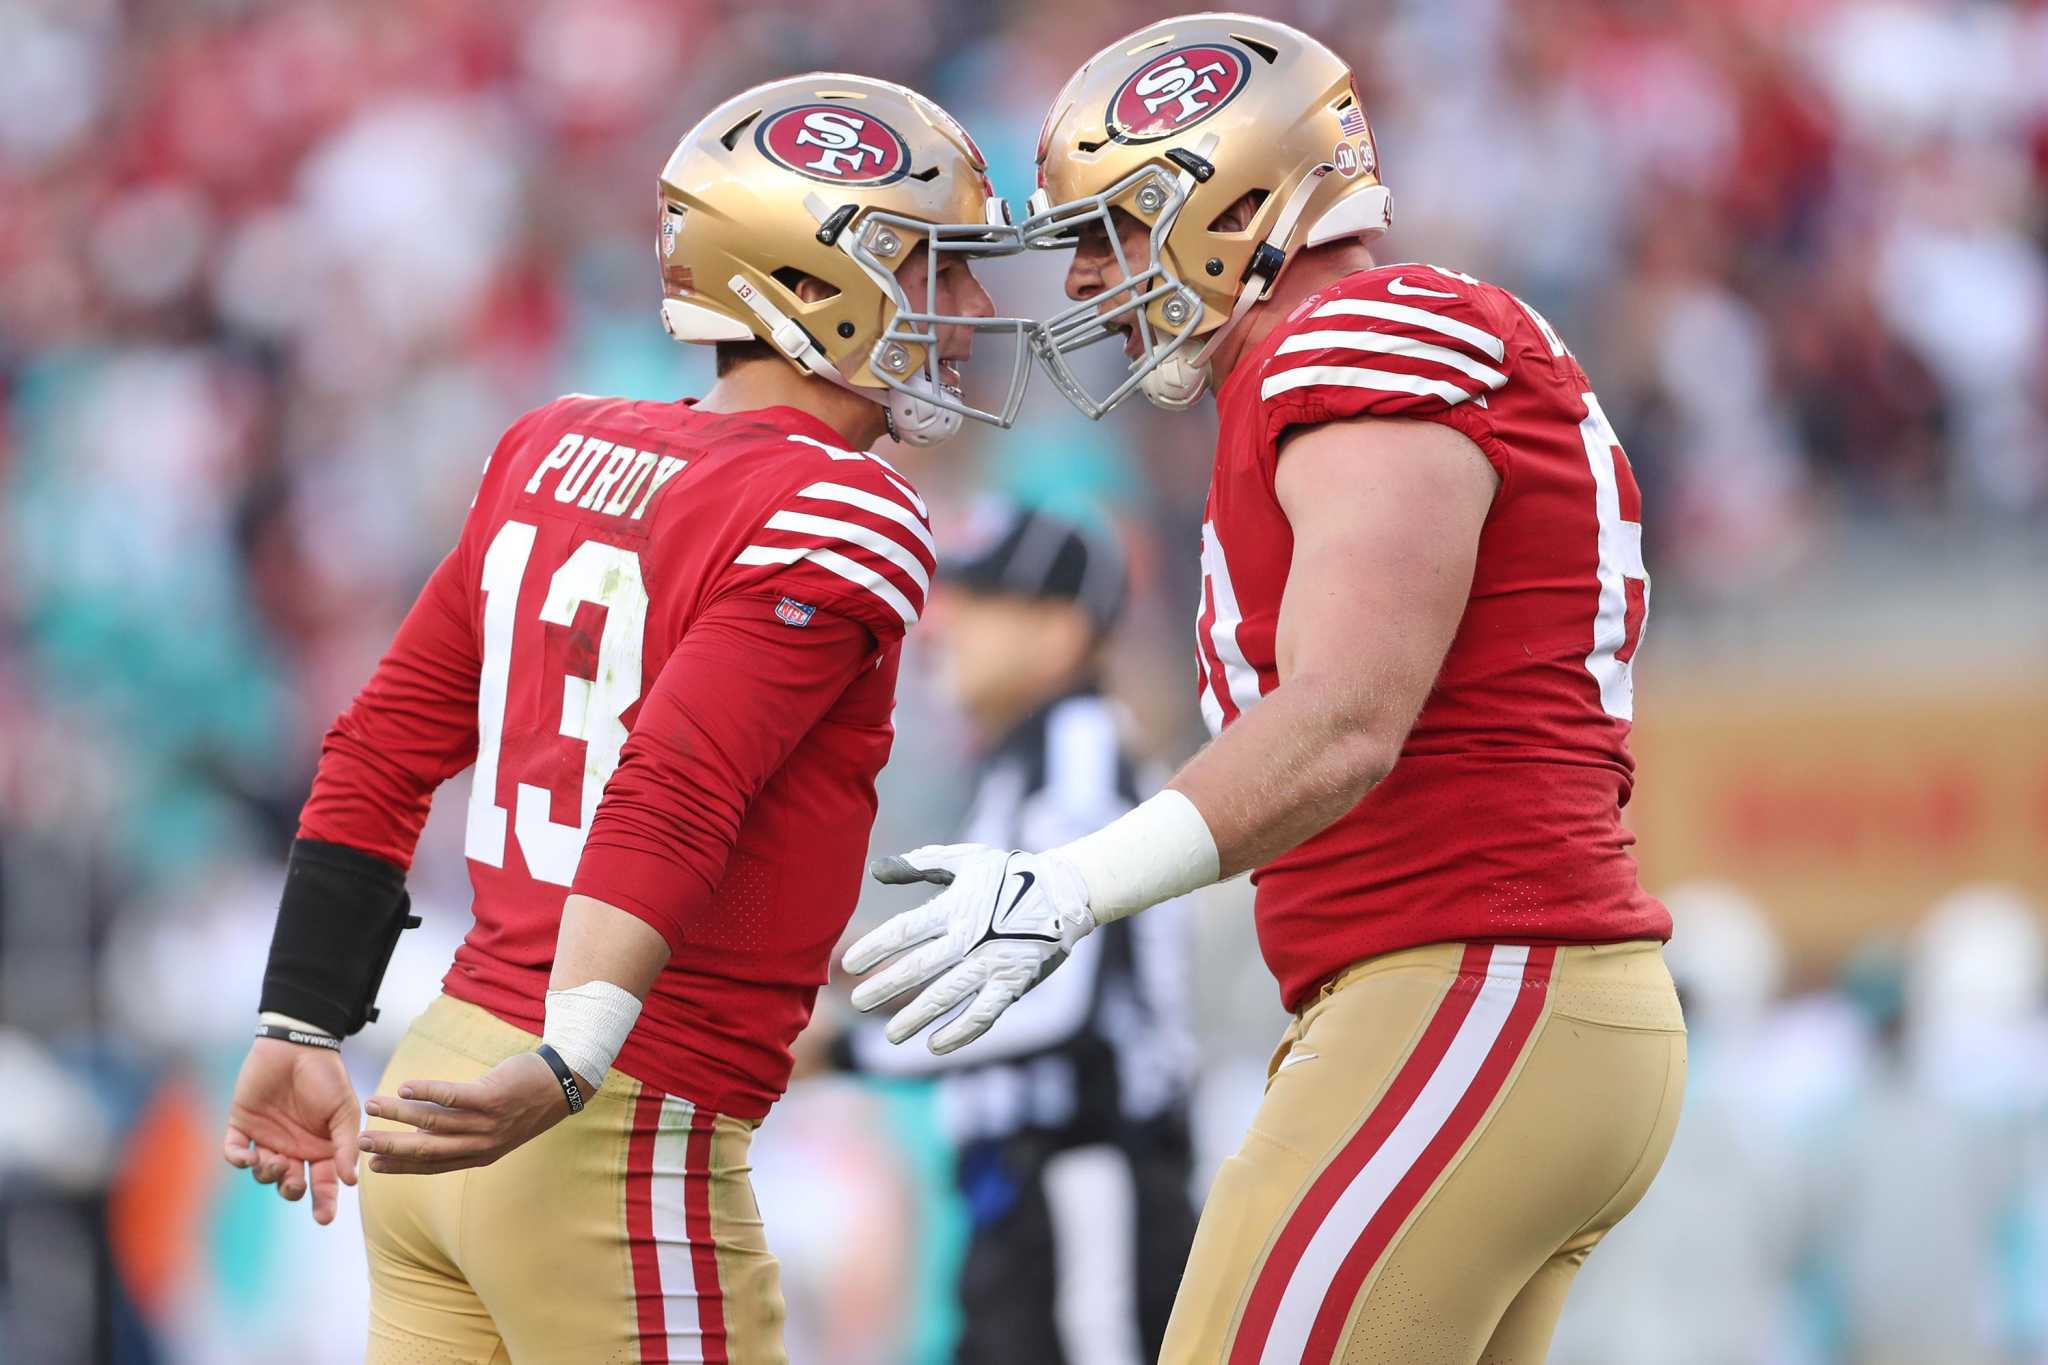 49ers beat Dolphins, but lose Garoppolo for the season with a broken foot